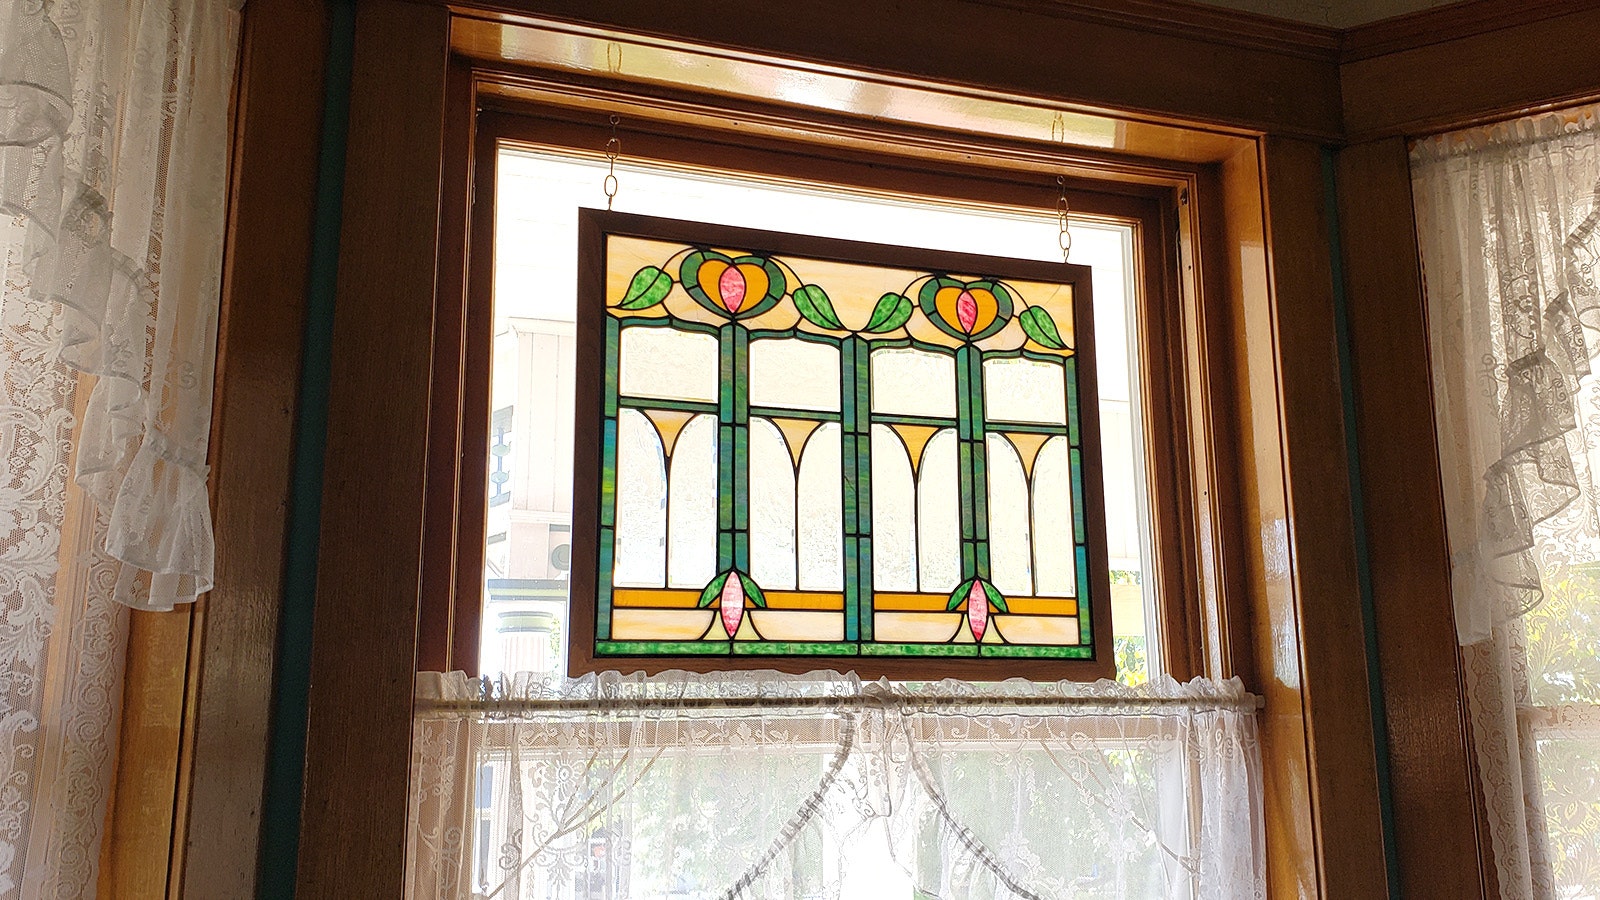 An original stained-glass window in the Ferris mansion.